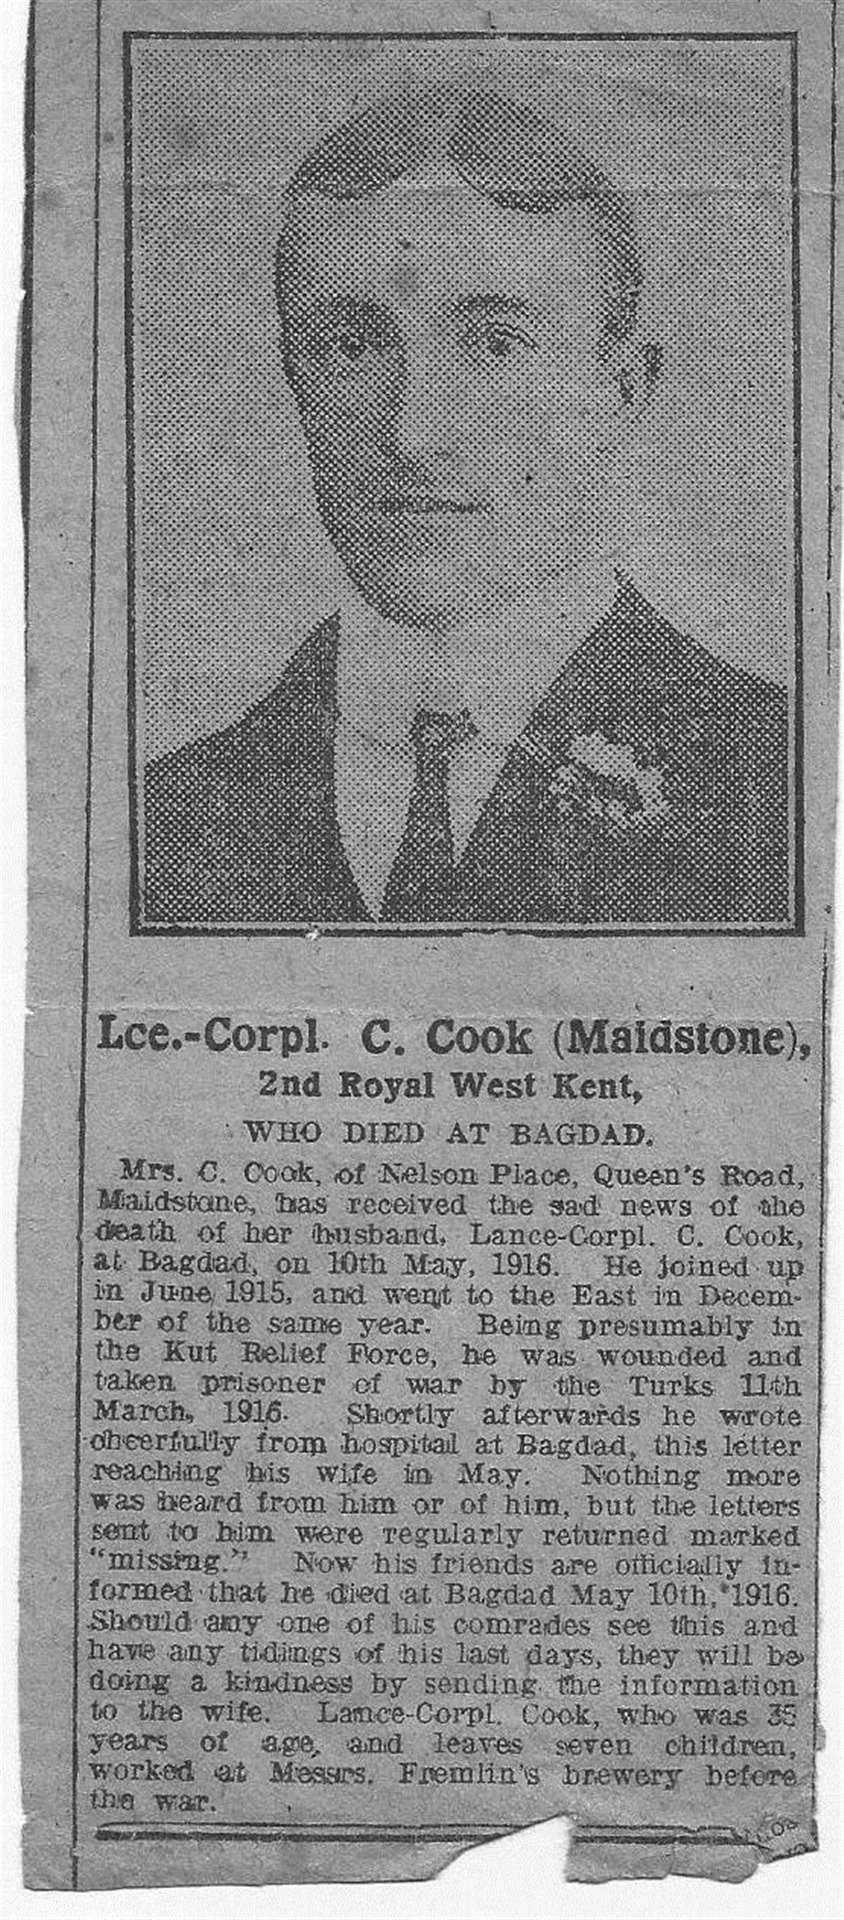 The Kent Messenger carried a report of Lance Corporal Charles Cook's death in 1916